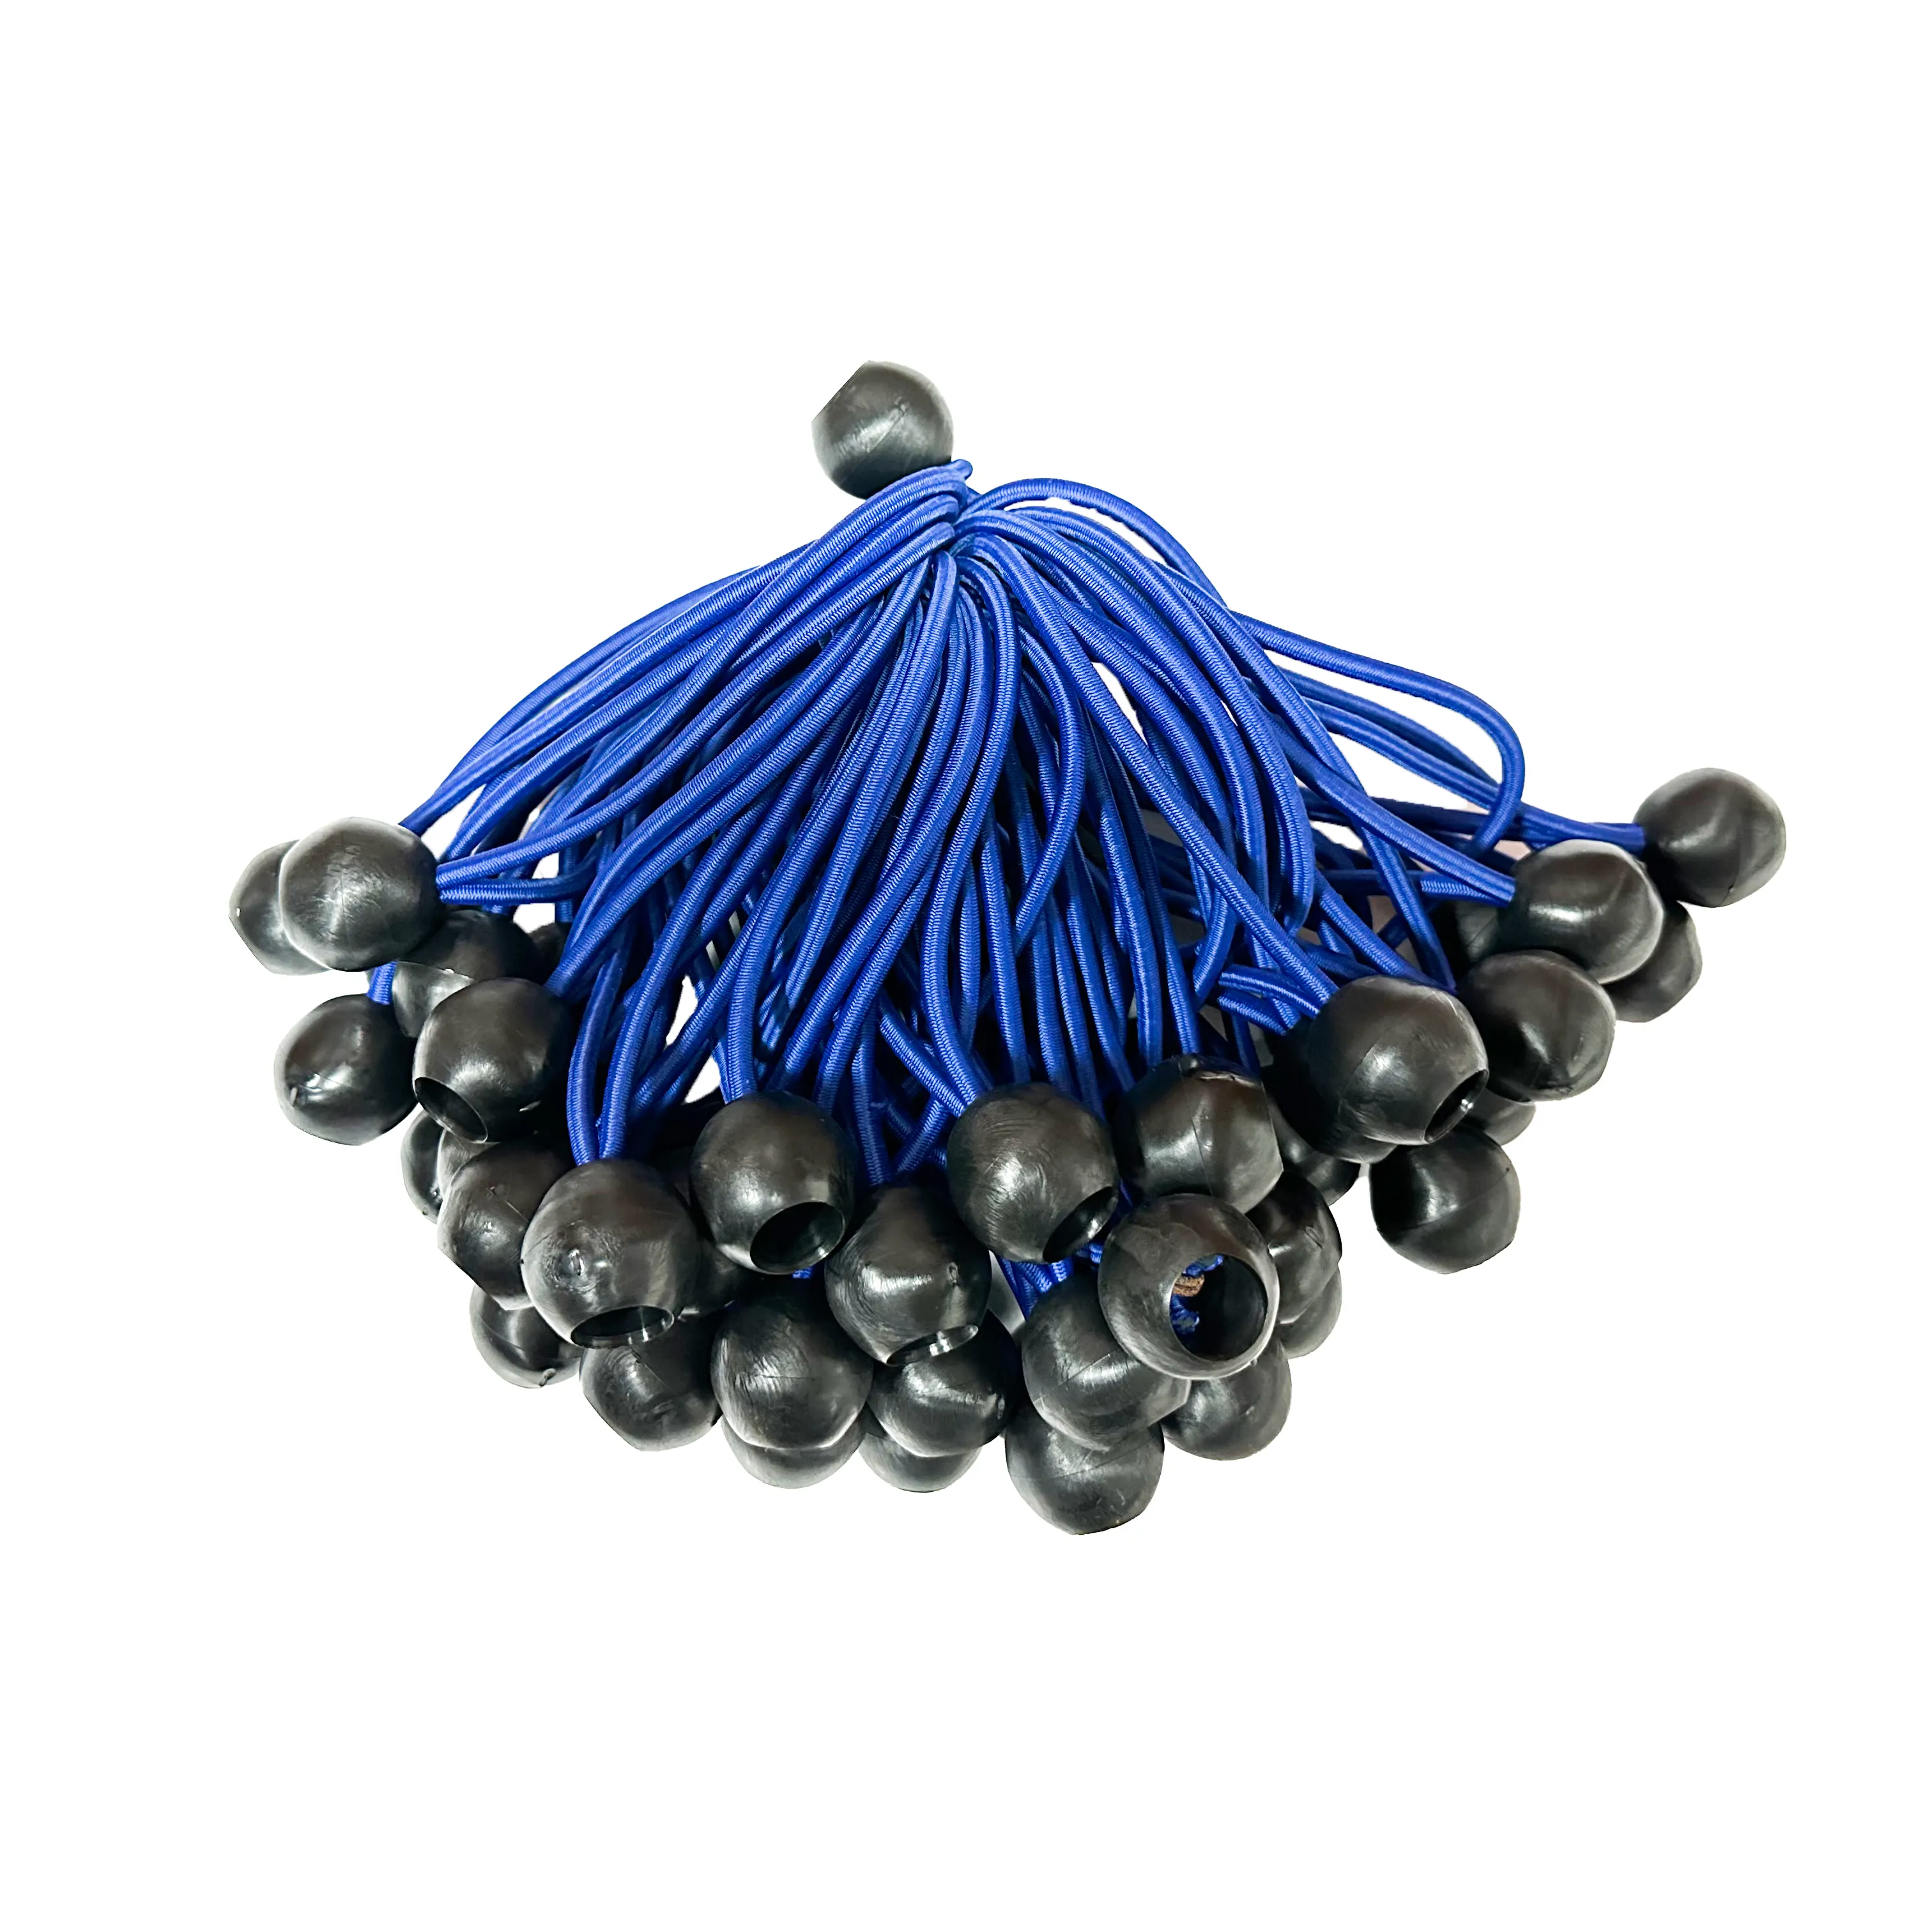 6-Inch Ball Bungee Cords Heavy-Duty 50-Piece Set with Balls for Canopy Tarp Tie at a best Price